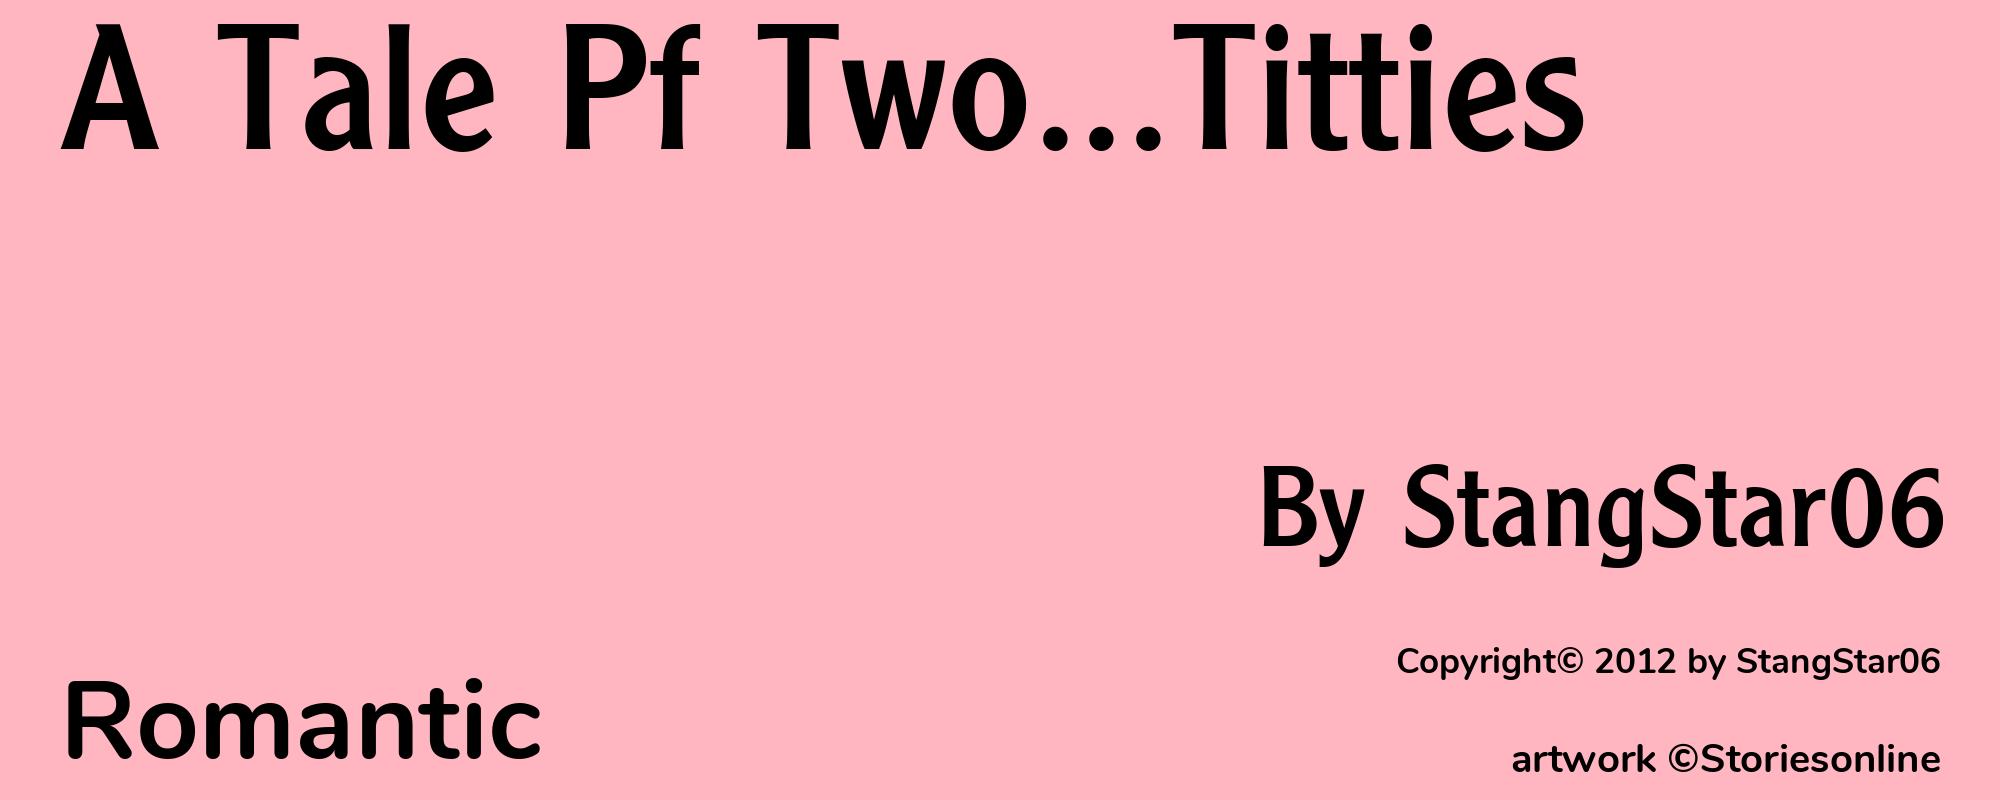 A Tale Pf Two...Titties - Cover